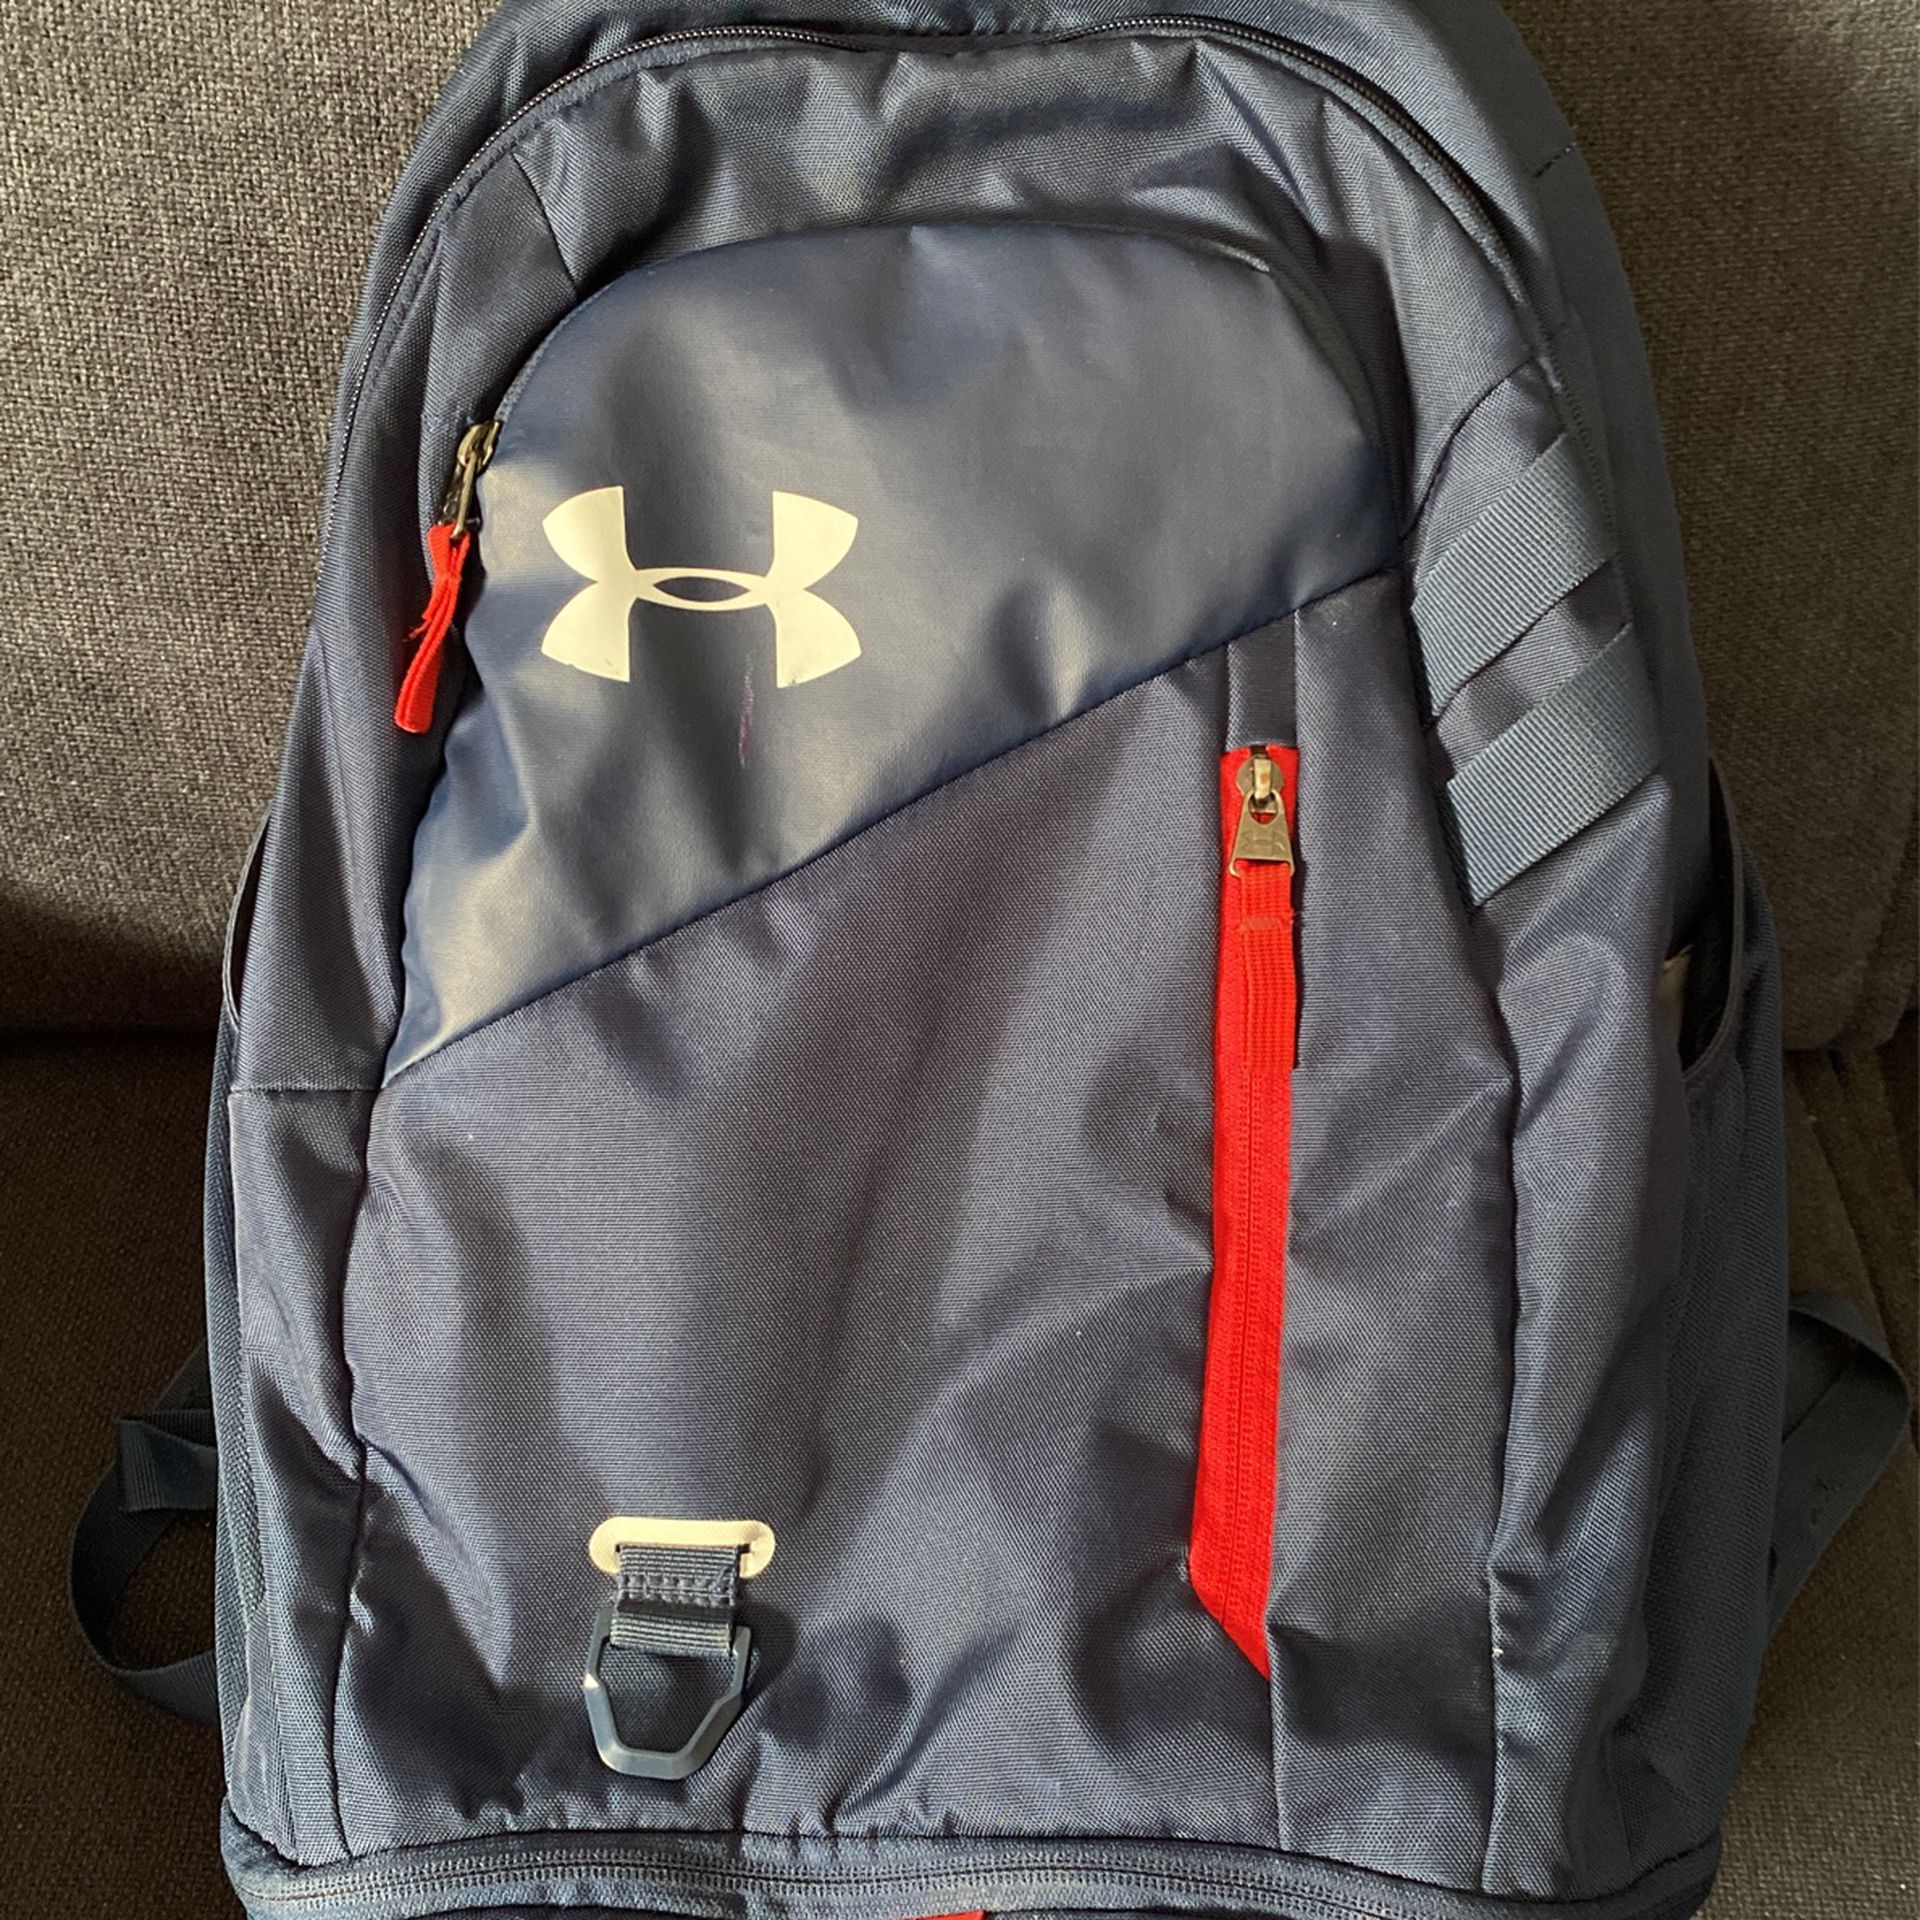 Great Condition Backpack 